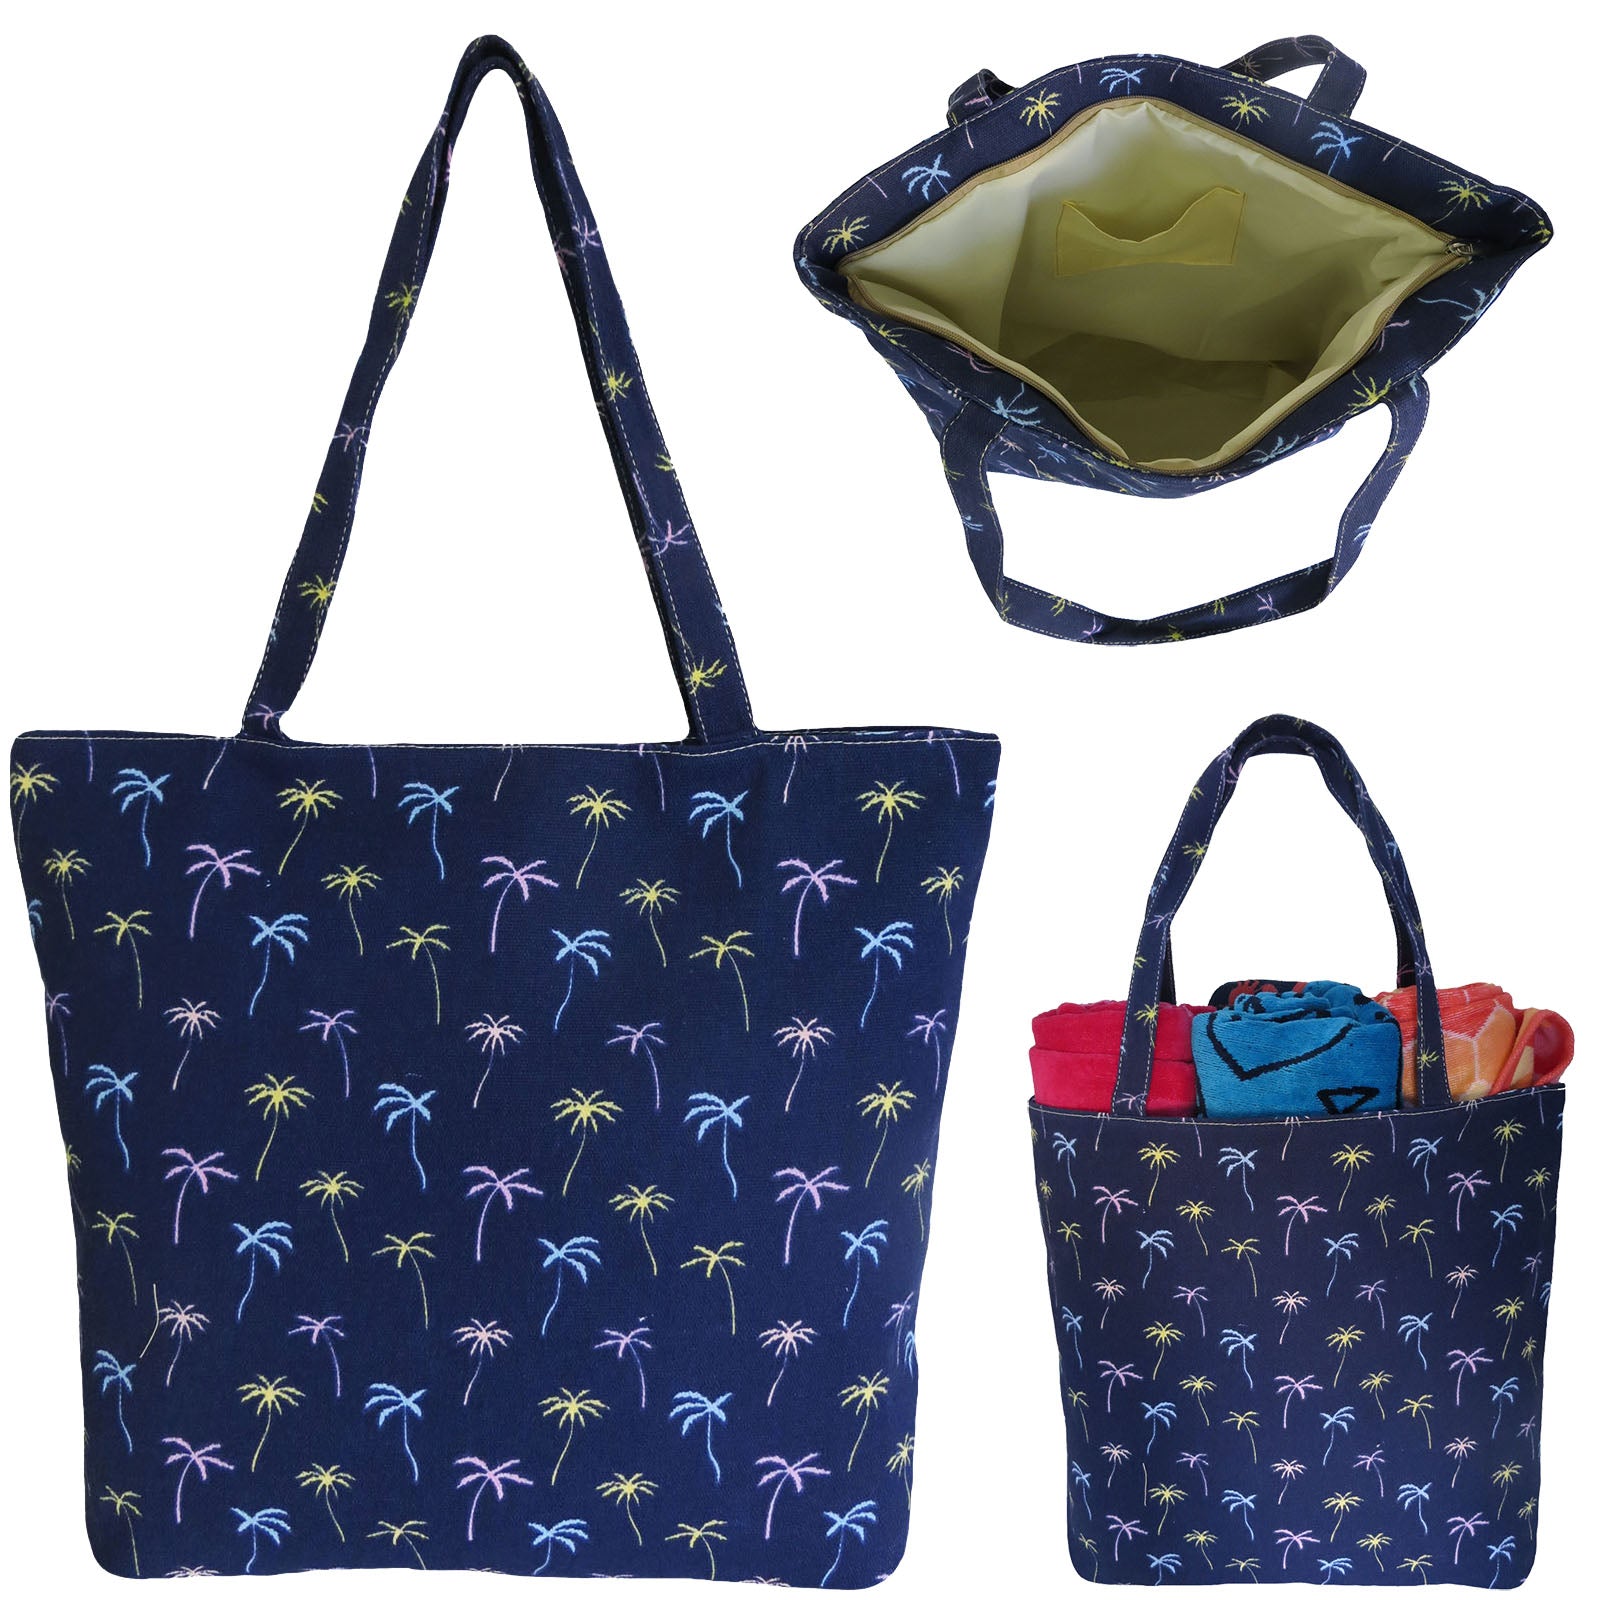 Tropical Wholesale Beach bag with Palm Tree Design - Alessa Palm in Navy Blue